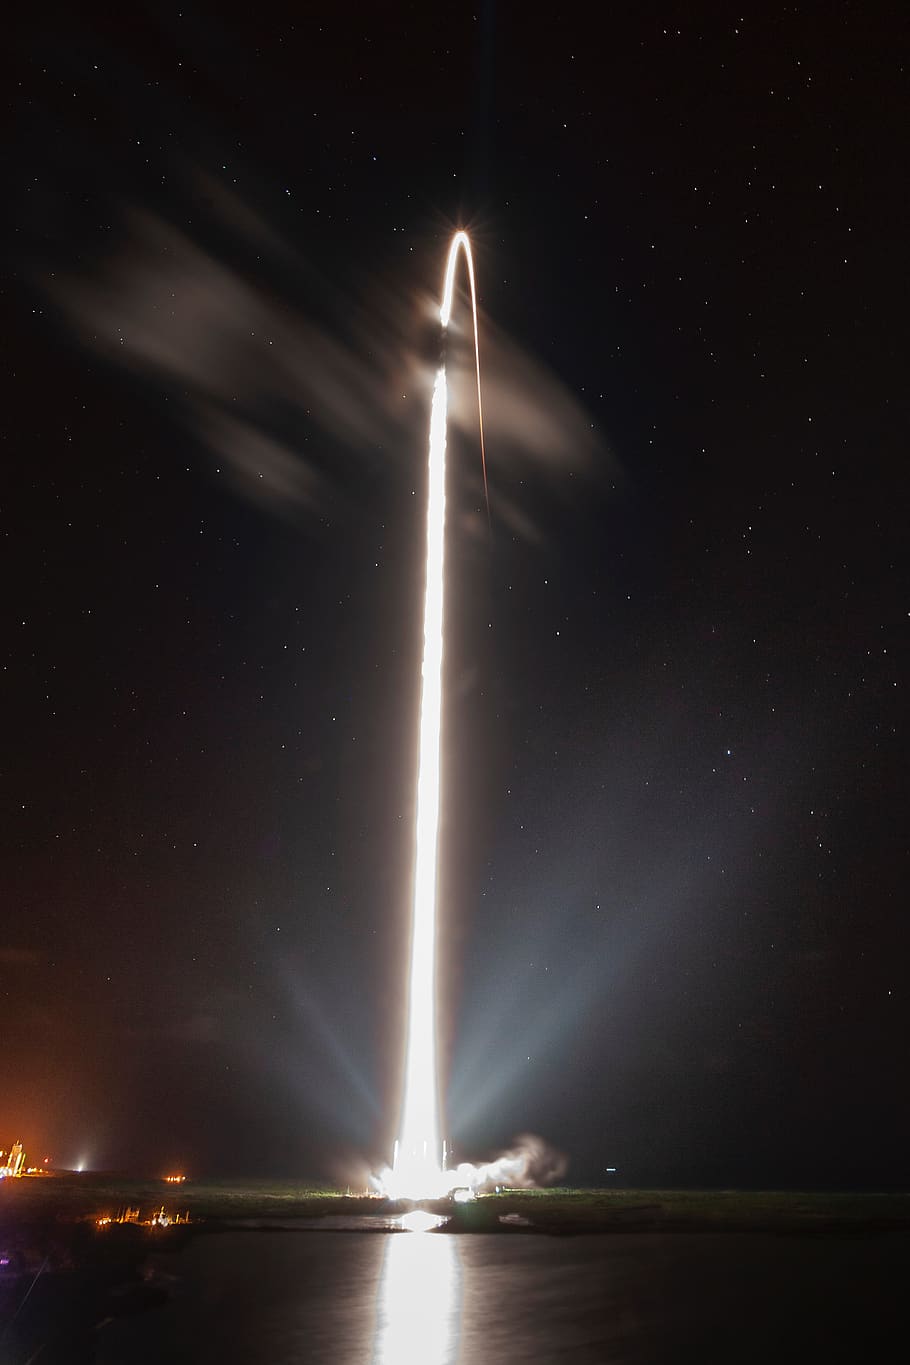 space, rocket, night, launch, liftoff, technology, science, stars, trail, water